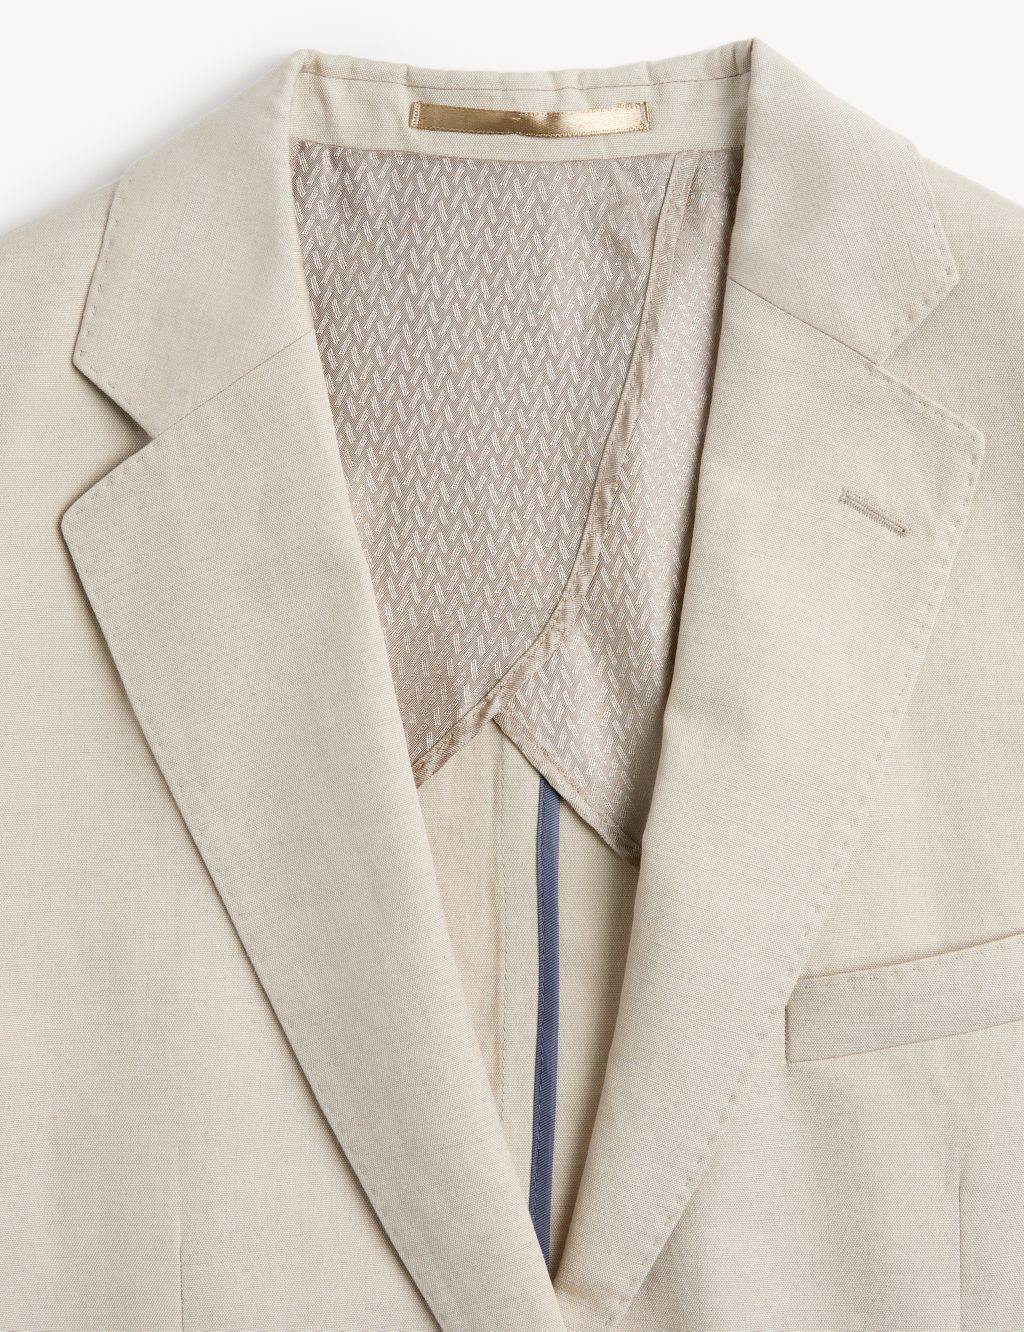 Tailored Fit Italian Silk And Linen Jacket image 4